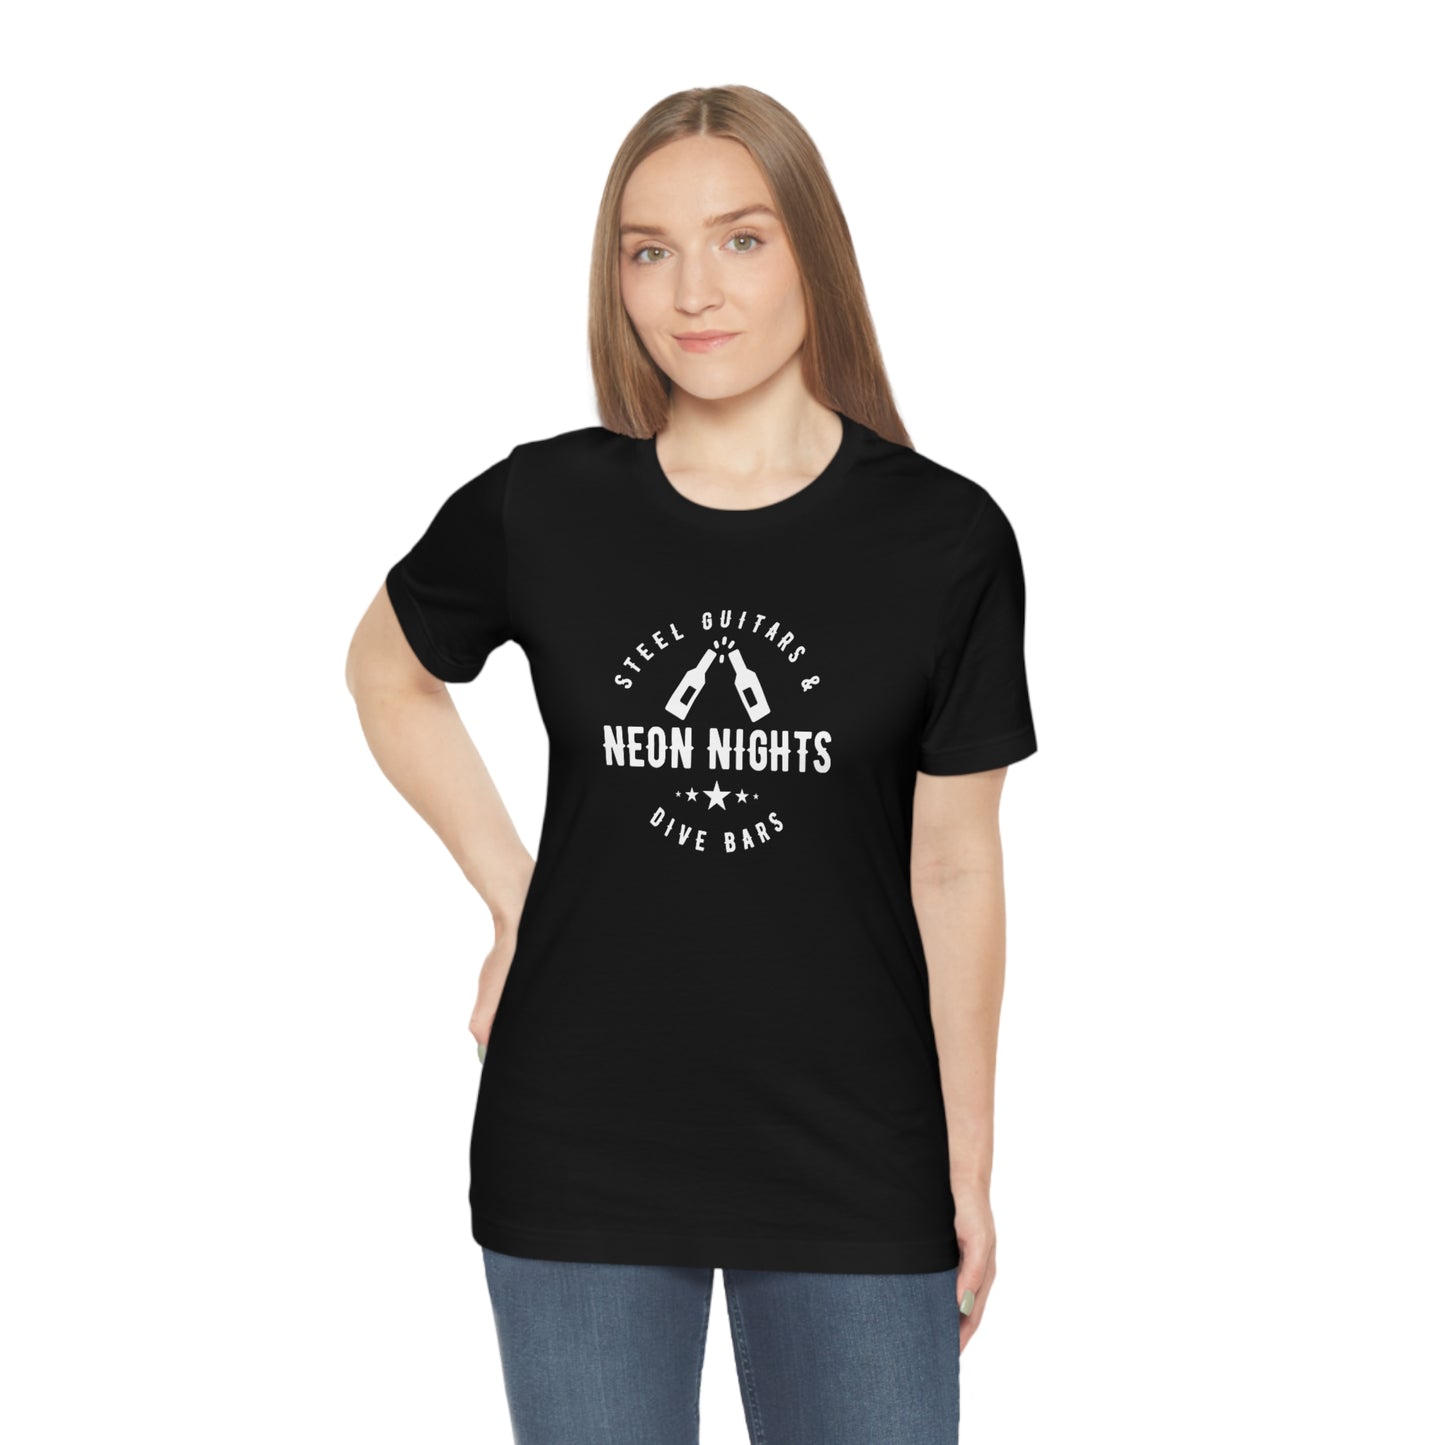 Steel Guitars and Dive Bars Jersey Tee